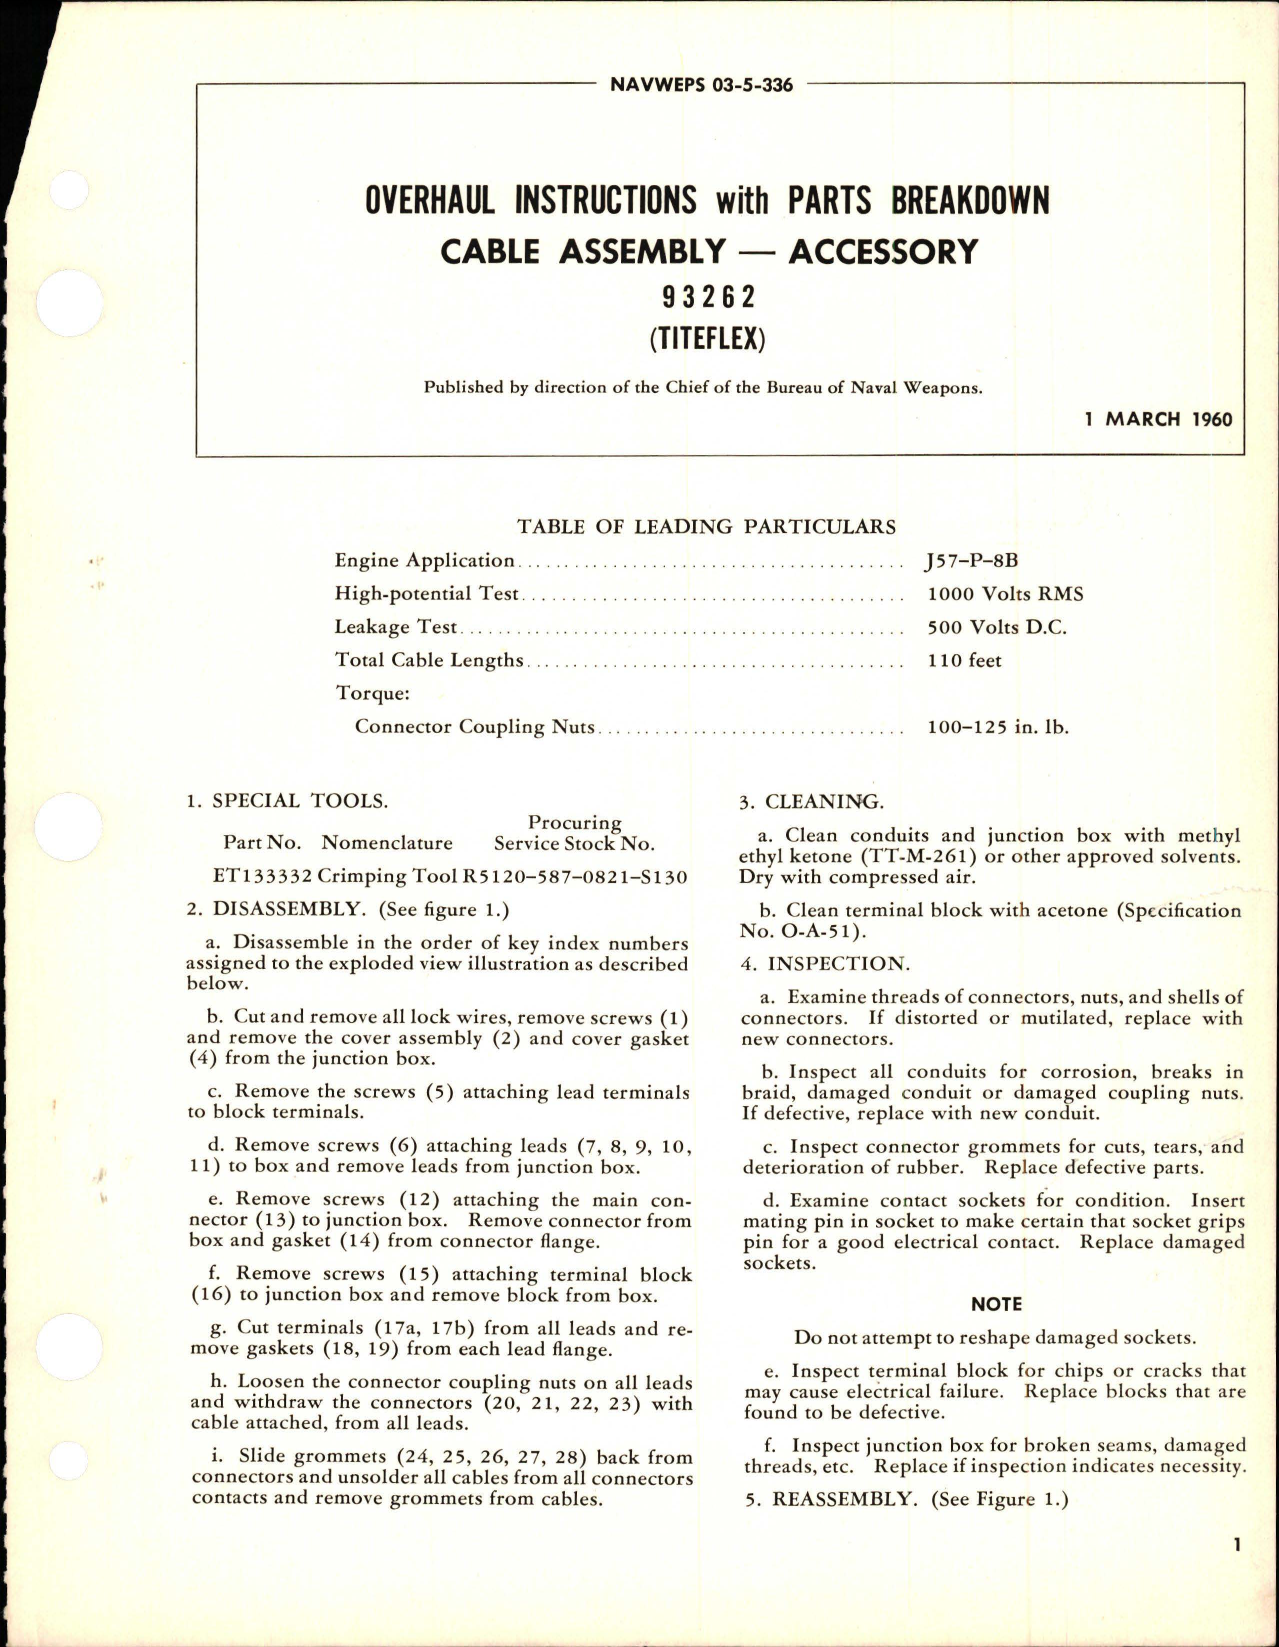 Sample page 1 from AirCorps Library document: Overhaul Instructions with Parts Breakdown for Cable Assembly and Accessory - 93262